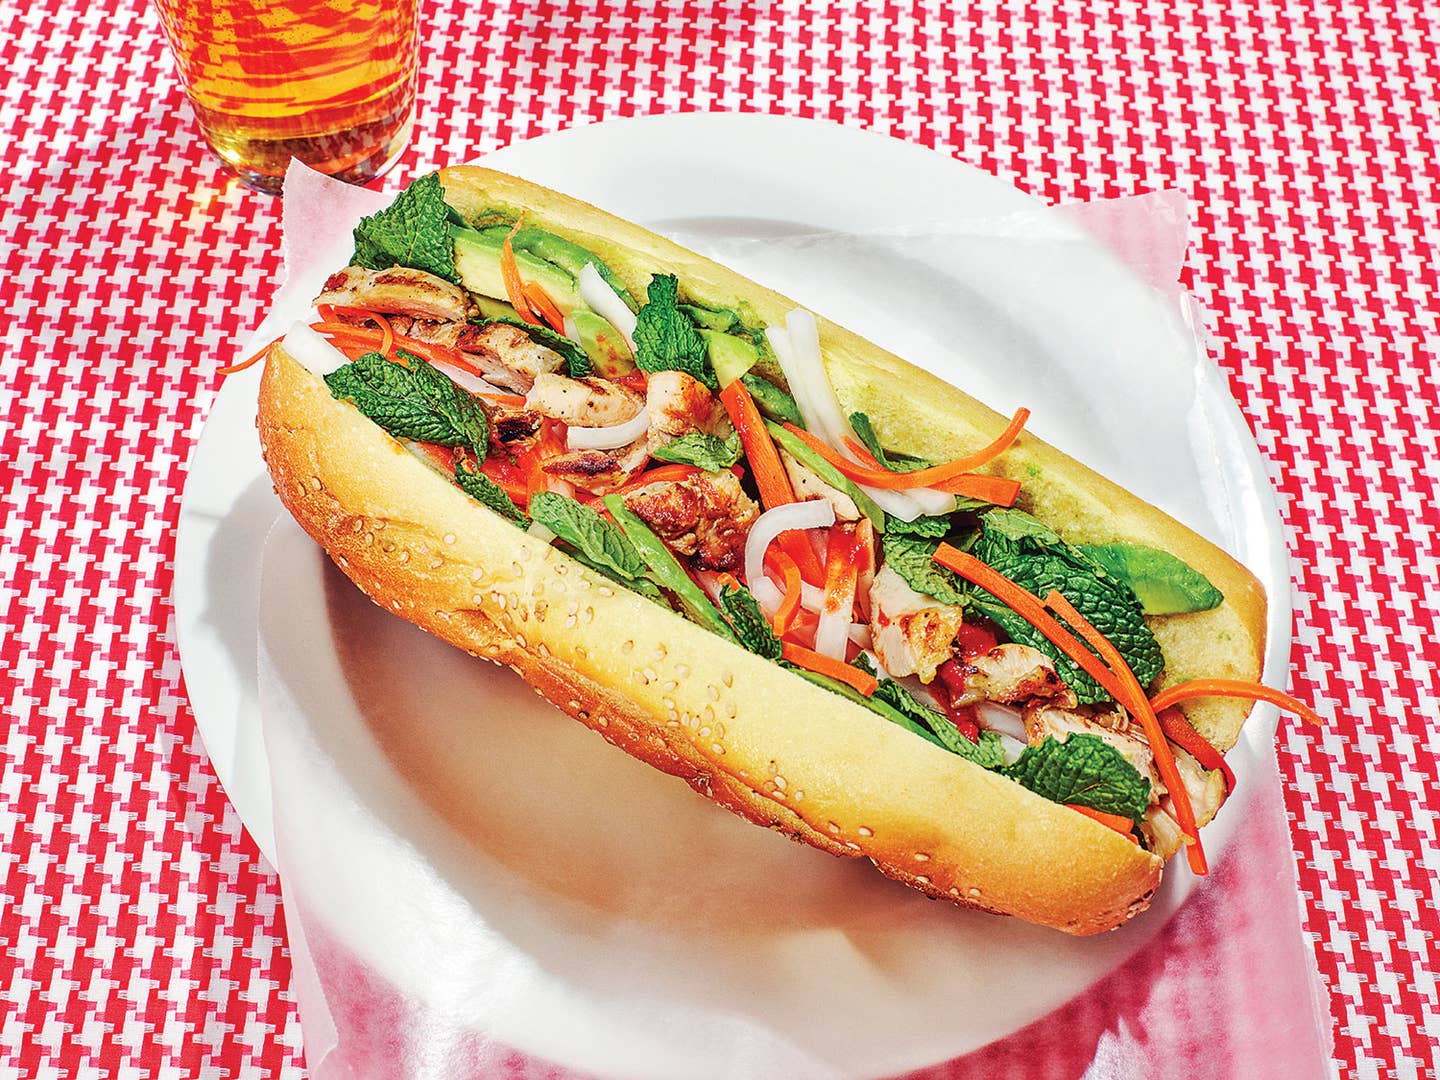 Follow These 5 Steps to the Best Banh Mi